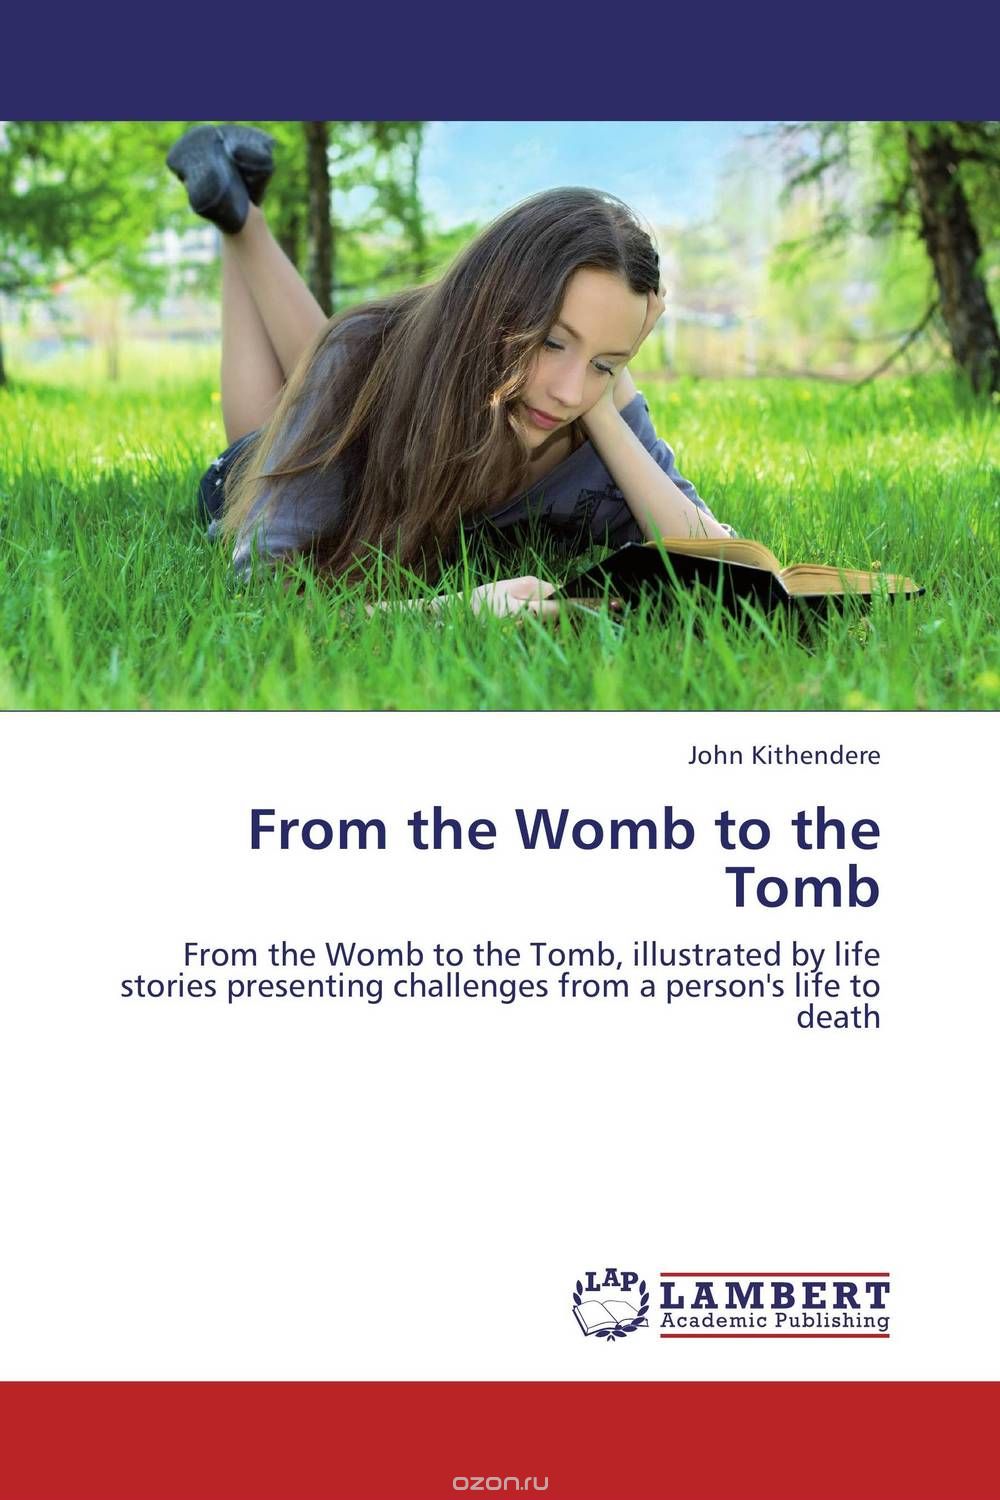 Скачать книгу "From the Womb to the Tomb"